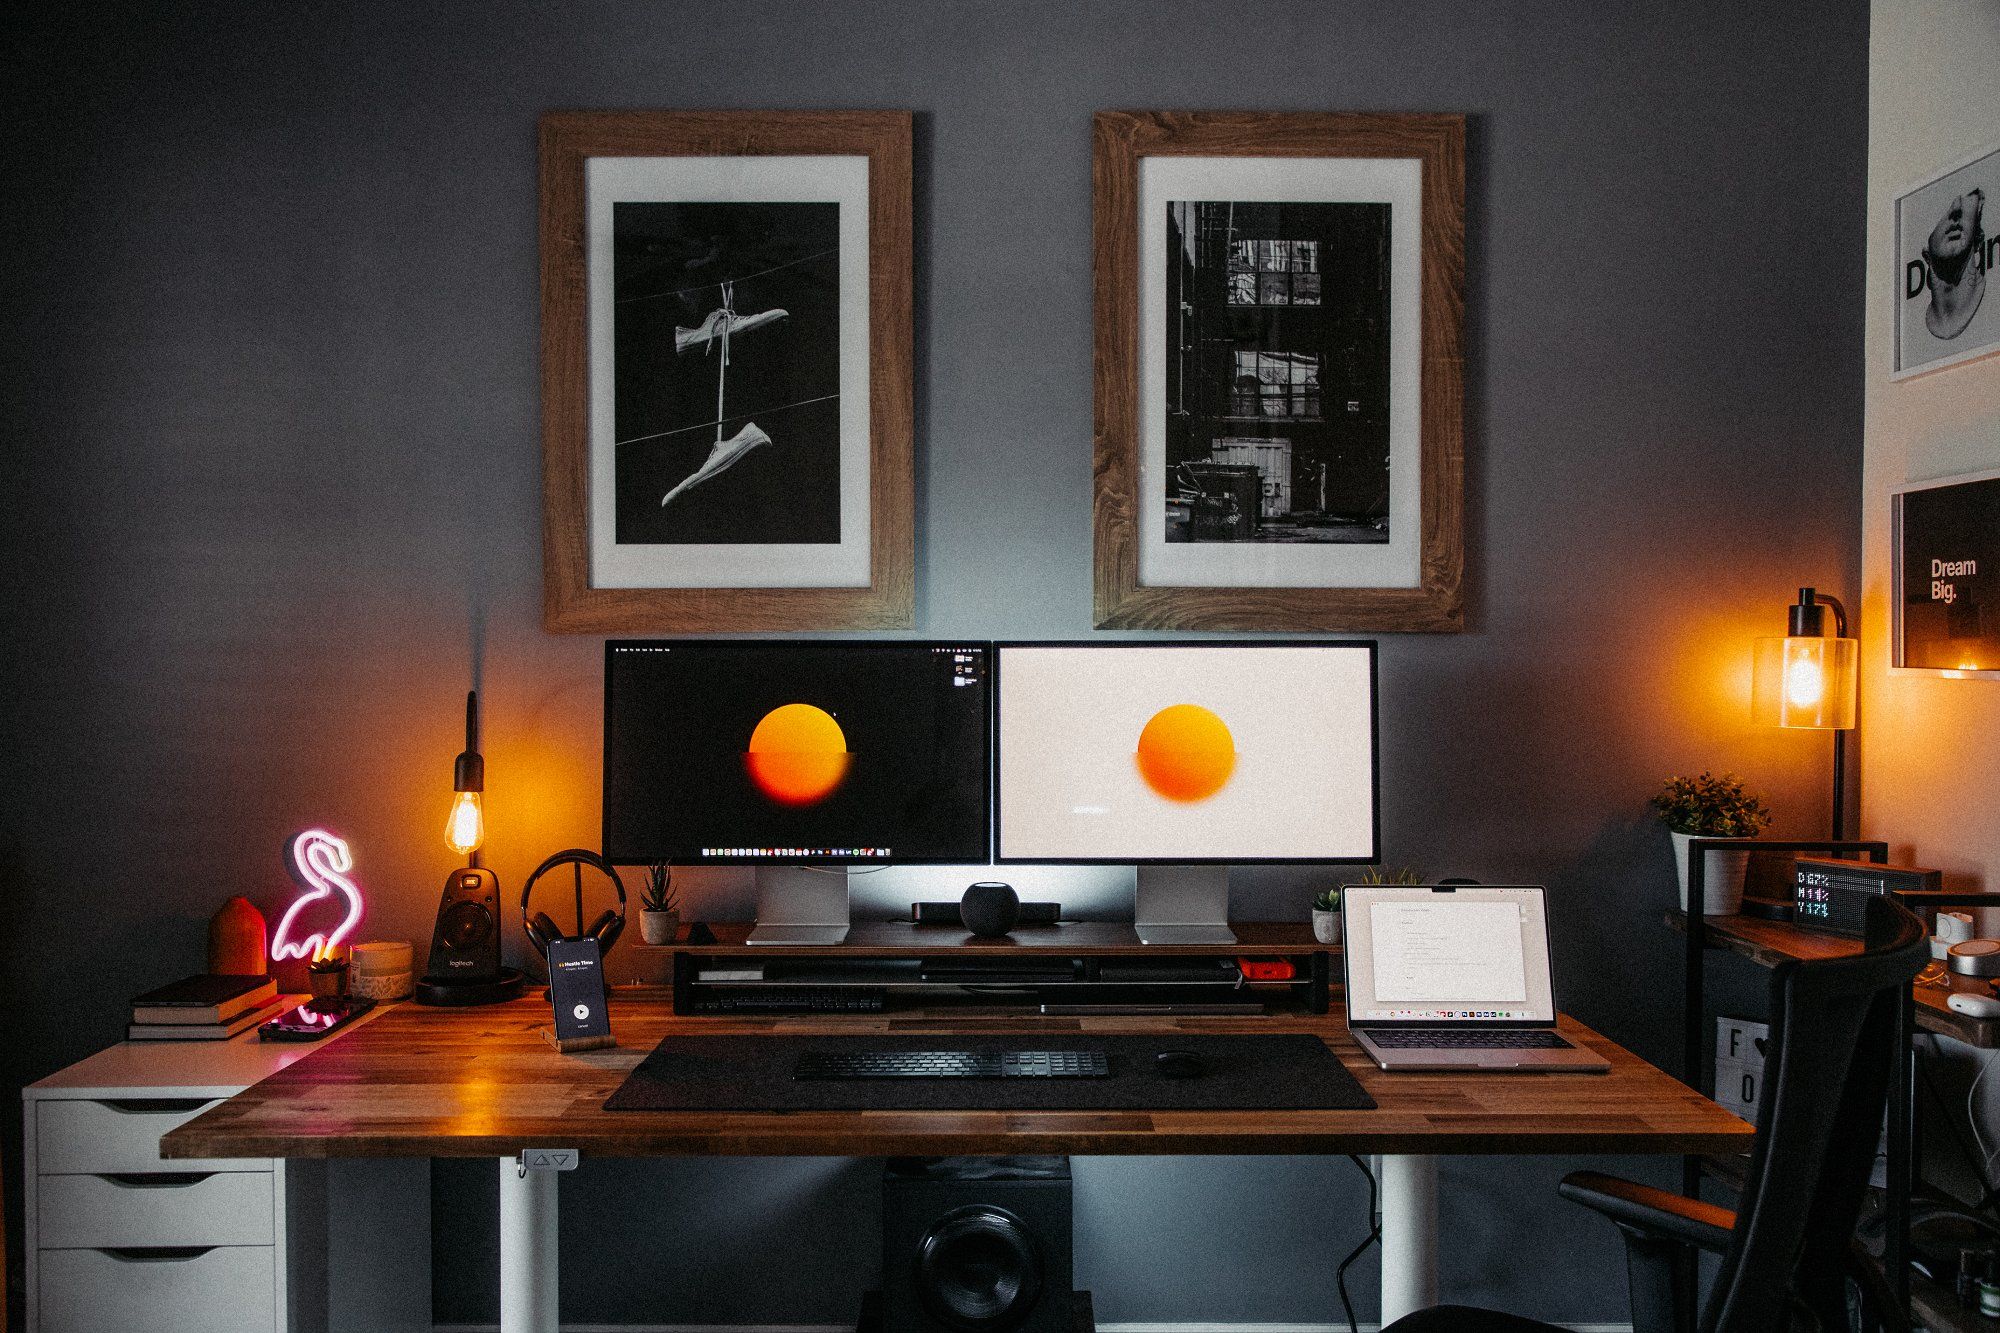 A symmetrically arranged standing desk setup with two Apple Studio Displays and two black-and-white posters on the wall above them